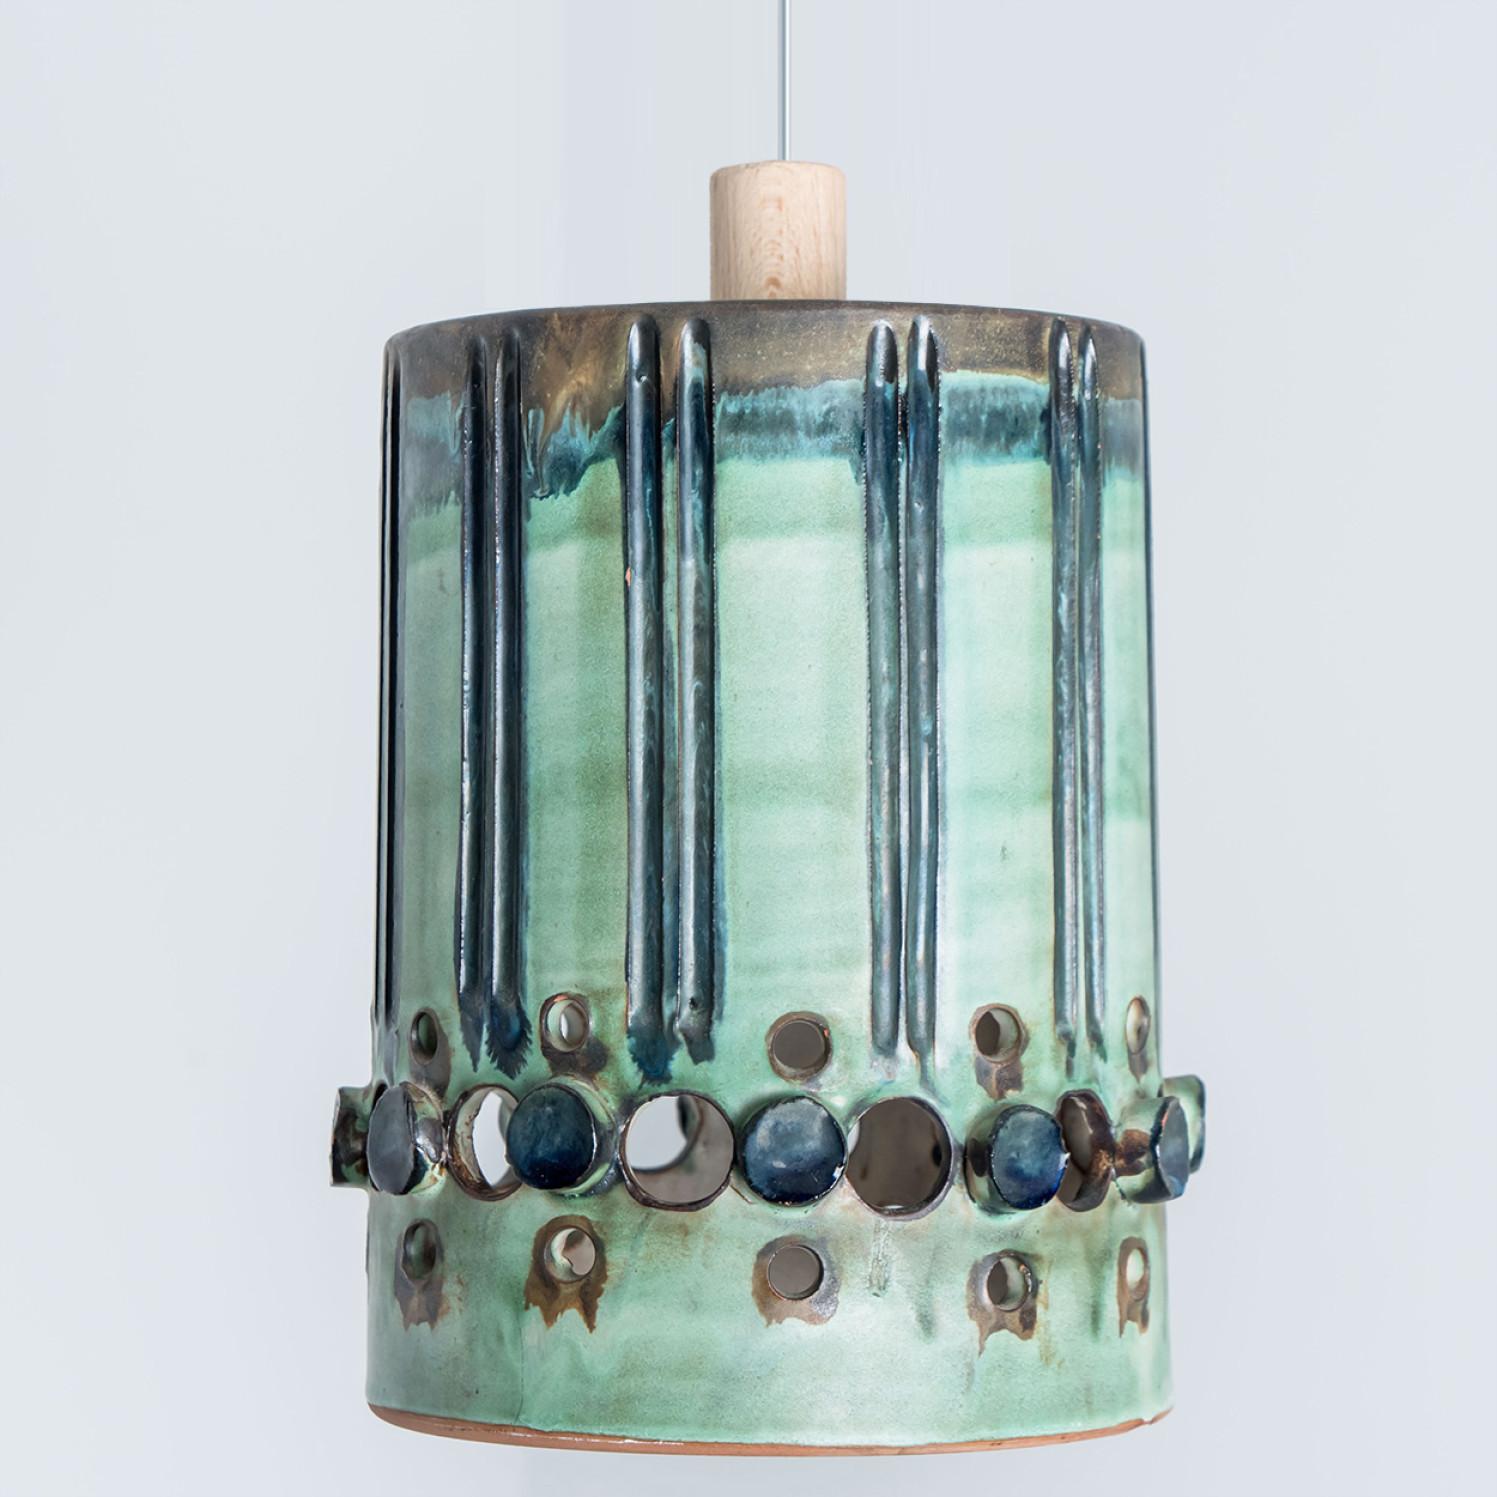 Stunning round hanging lamp with an unusual cylinder-like shape, made with rich colored green and turquoise ceramics, manufactured in the 1970s in Denmark. We also have a multitude of unique colored ceramic light sets and arrangements, all available